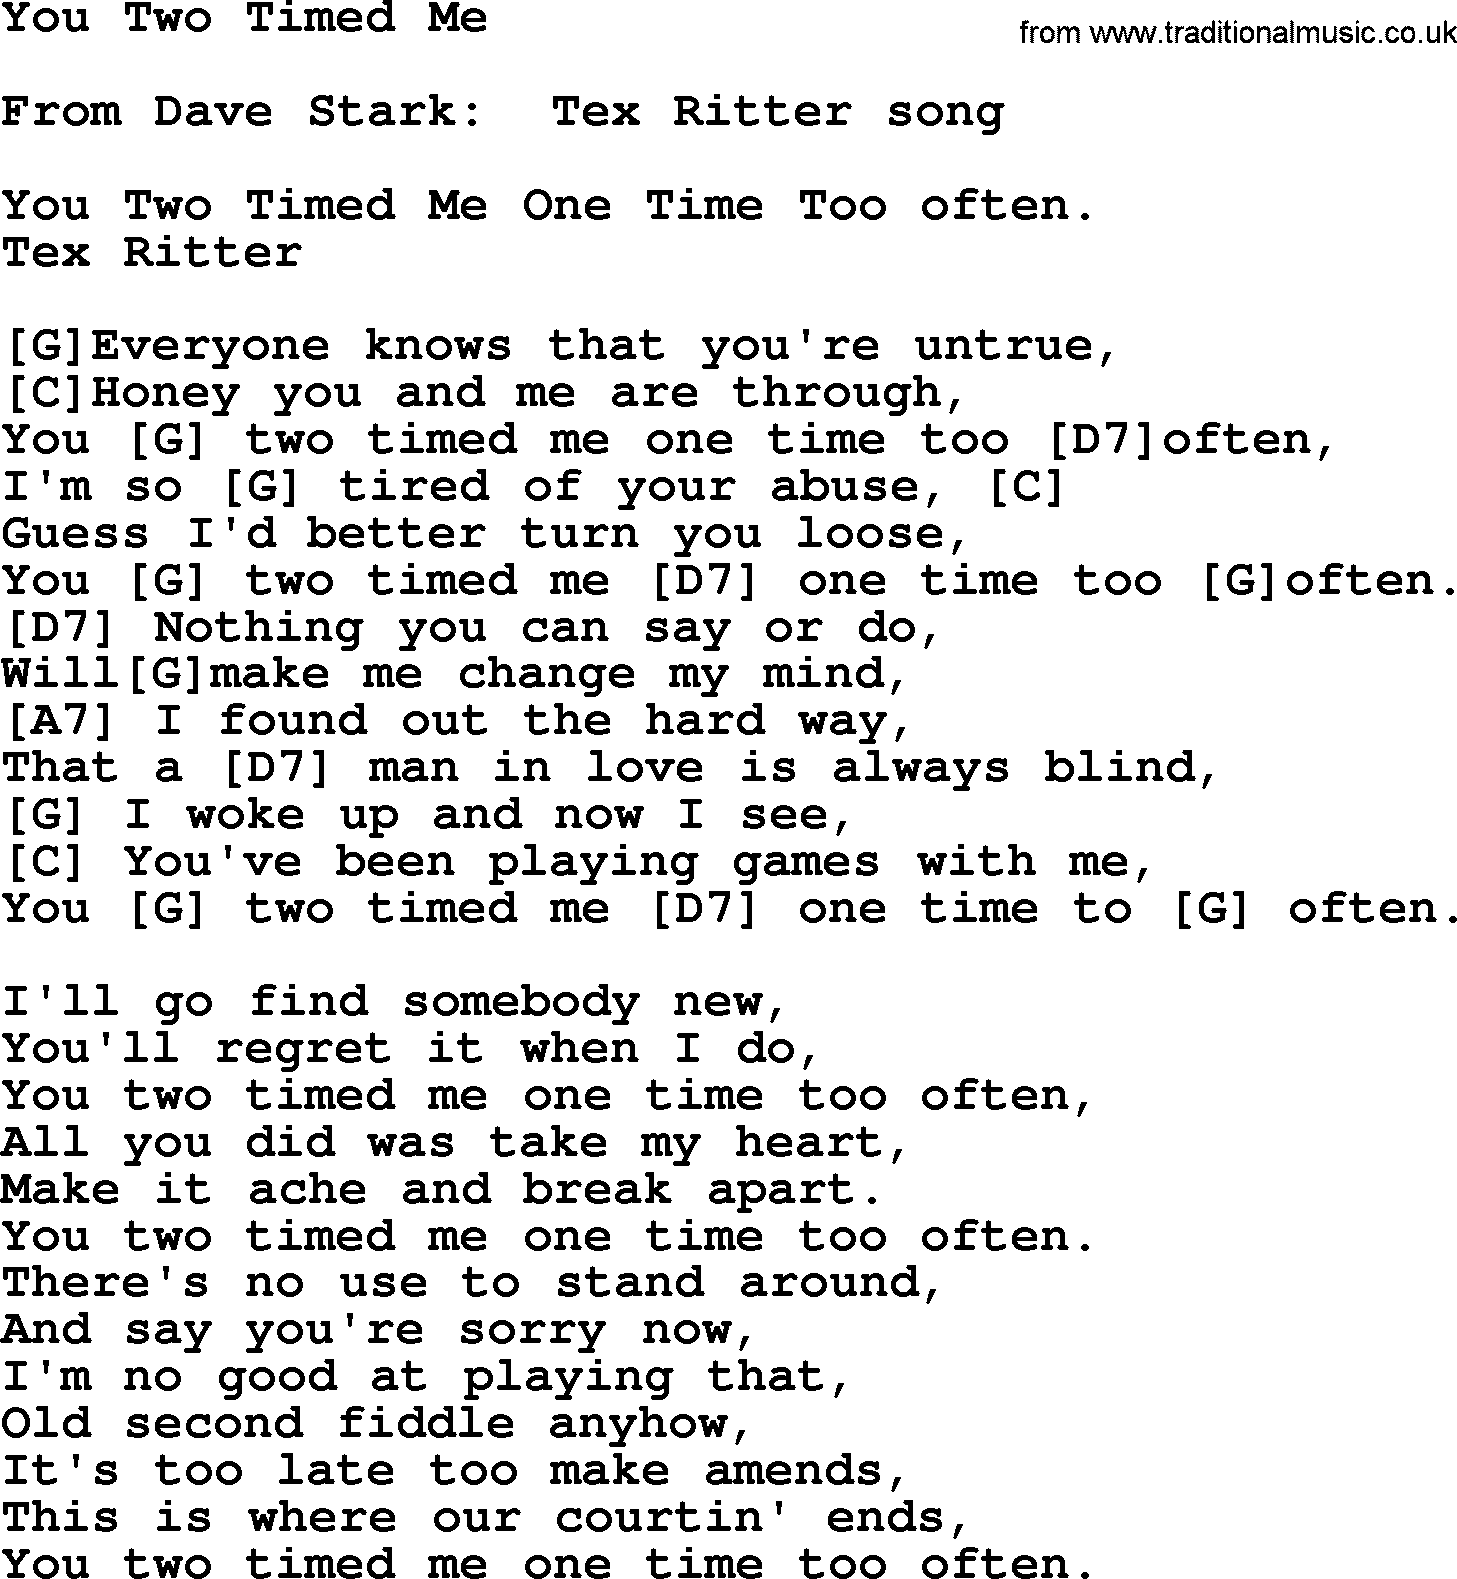 Bluegrass song: You Two Timed Me, lyrics and chords